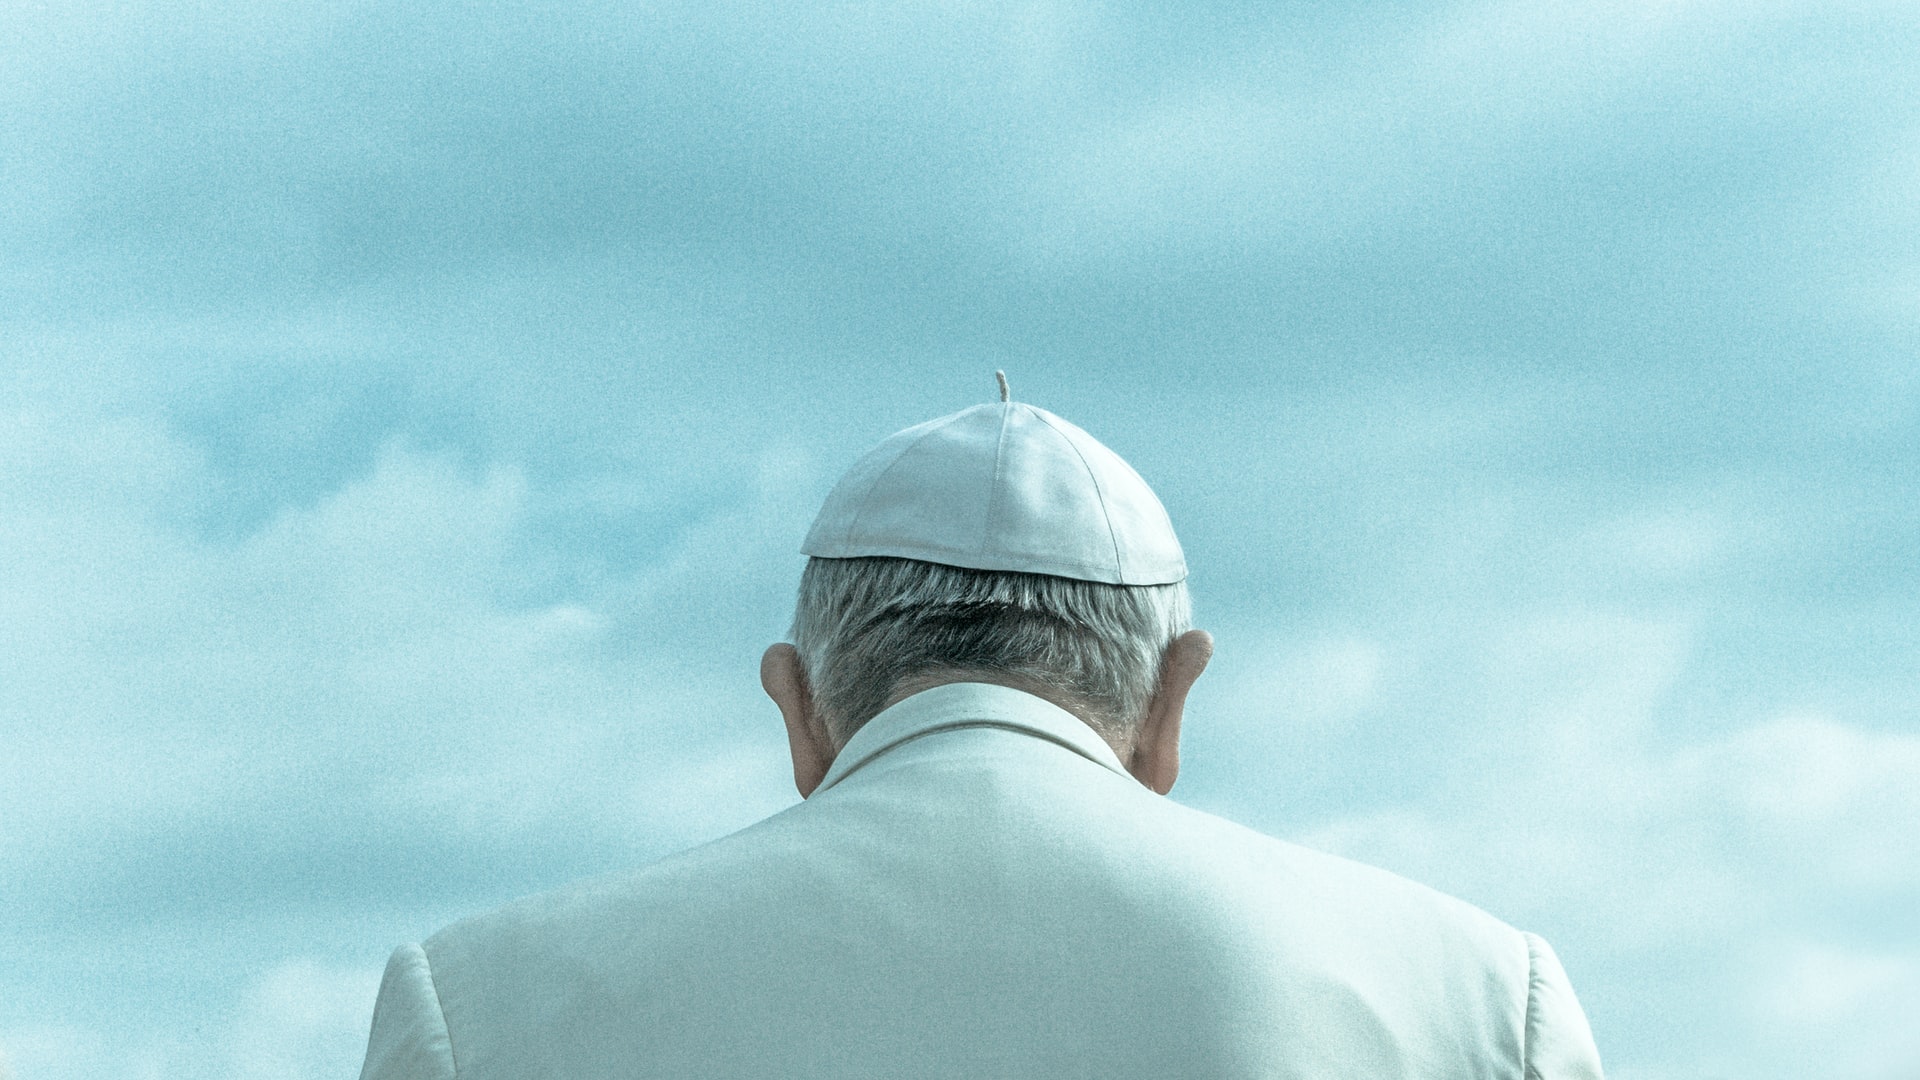 A photo of the back of Pope Francis' head as he looks out a blue sky